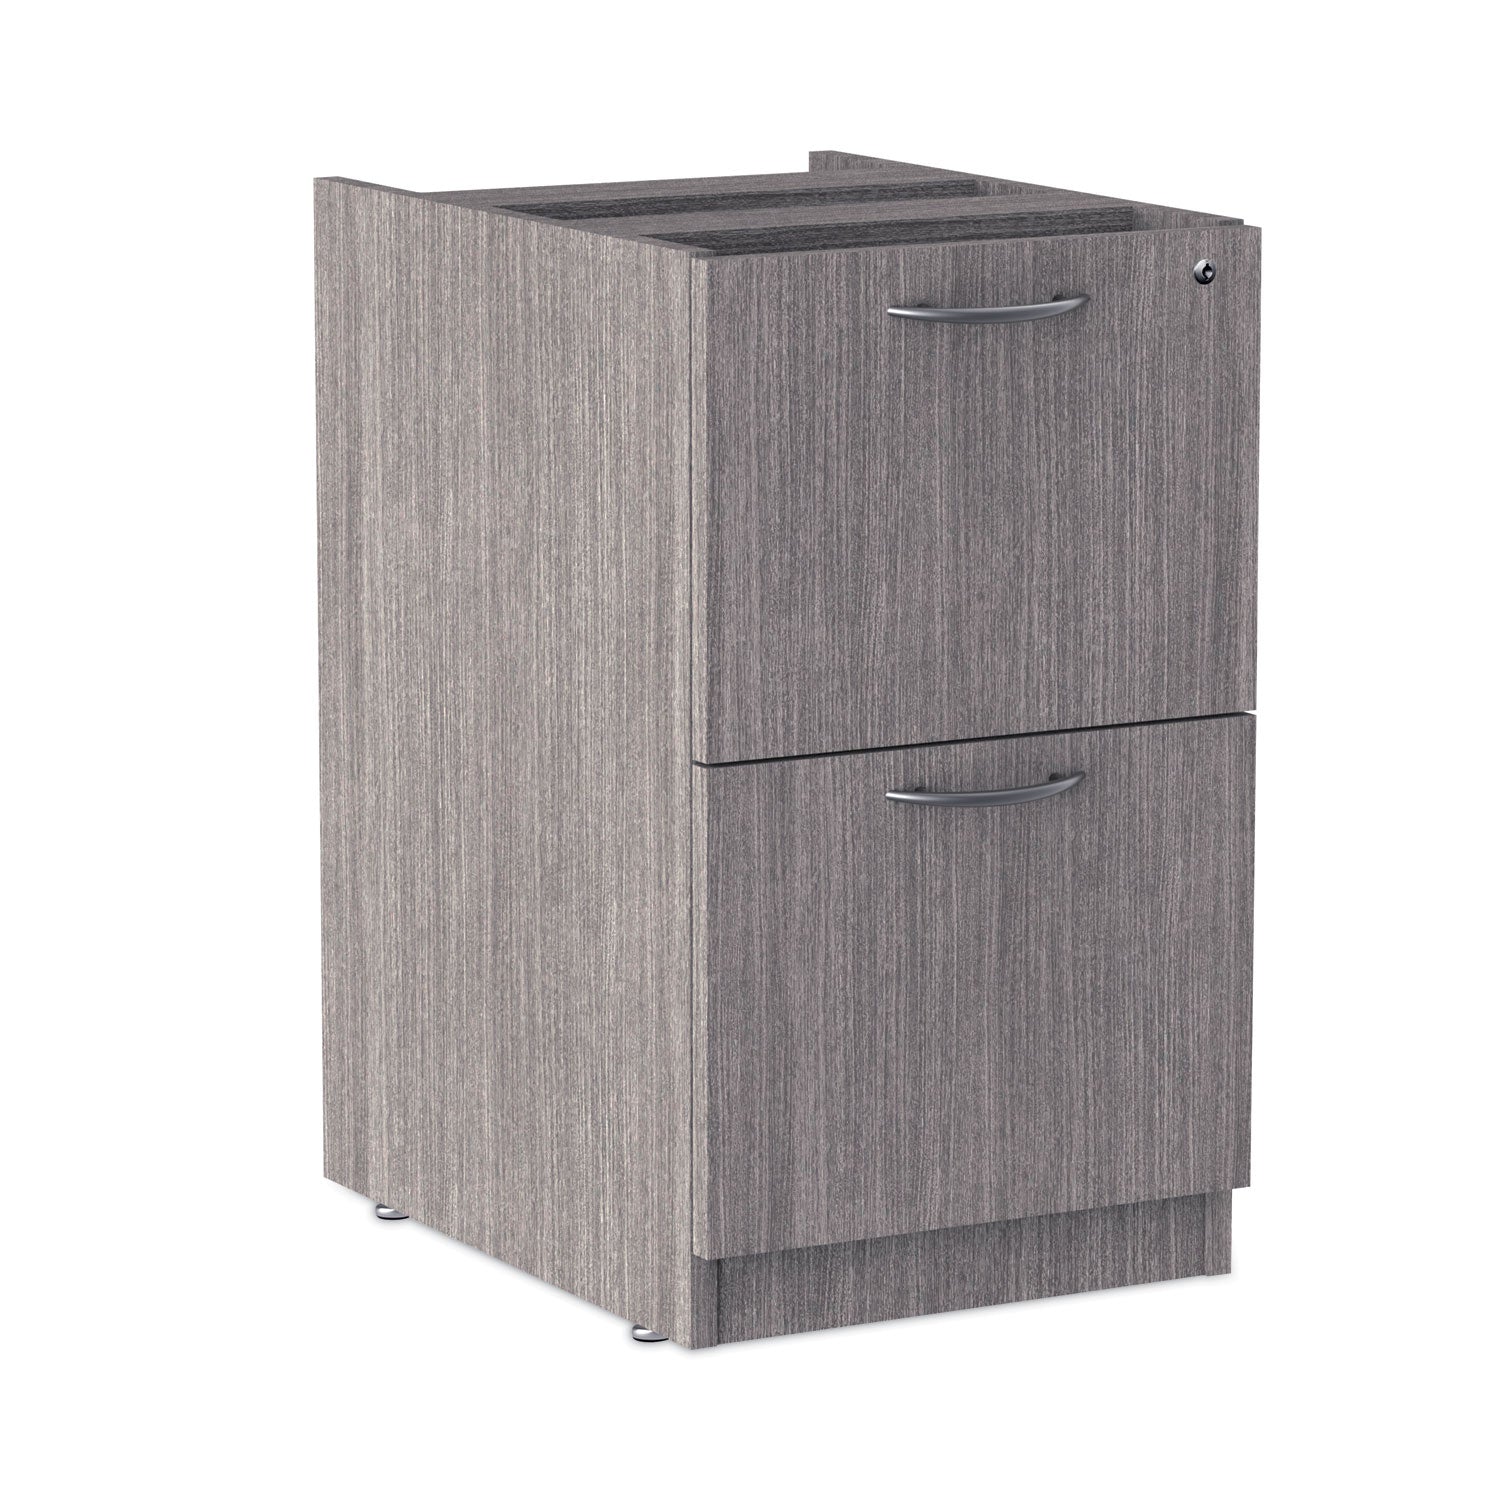 alera-valencia-series-full-pedestal-file-left-or-right-2-legal-letter-size-file-drawers-gray-1563-x-205-x-285_aleva542822gy - 8